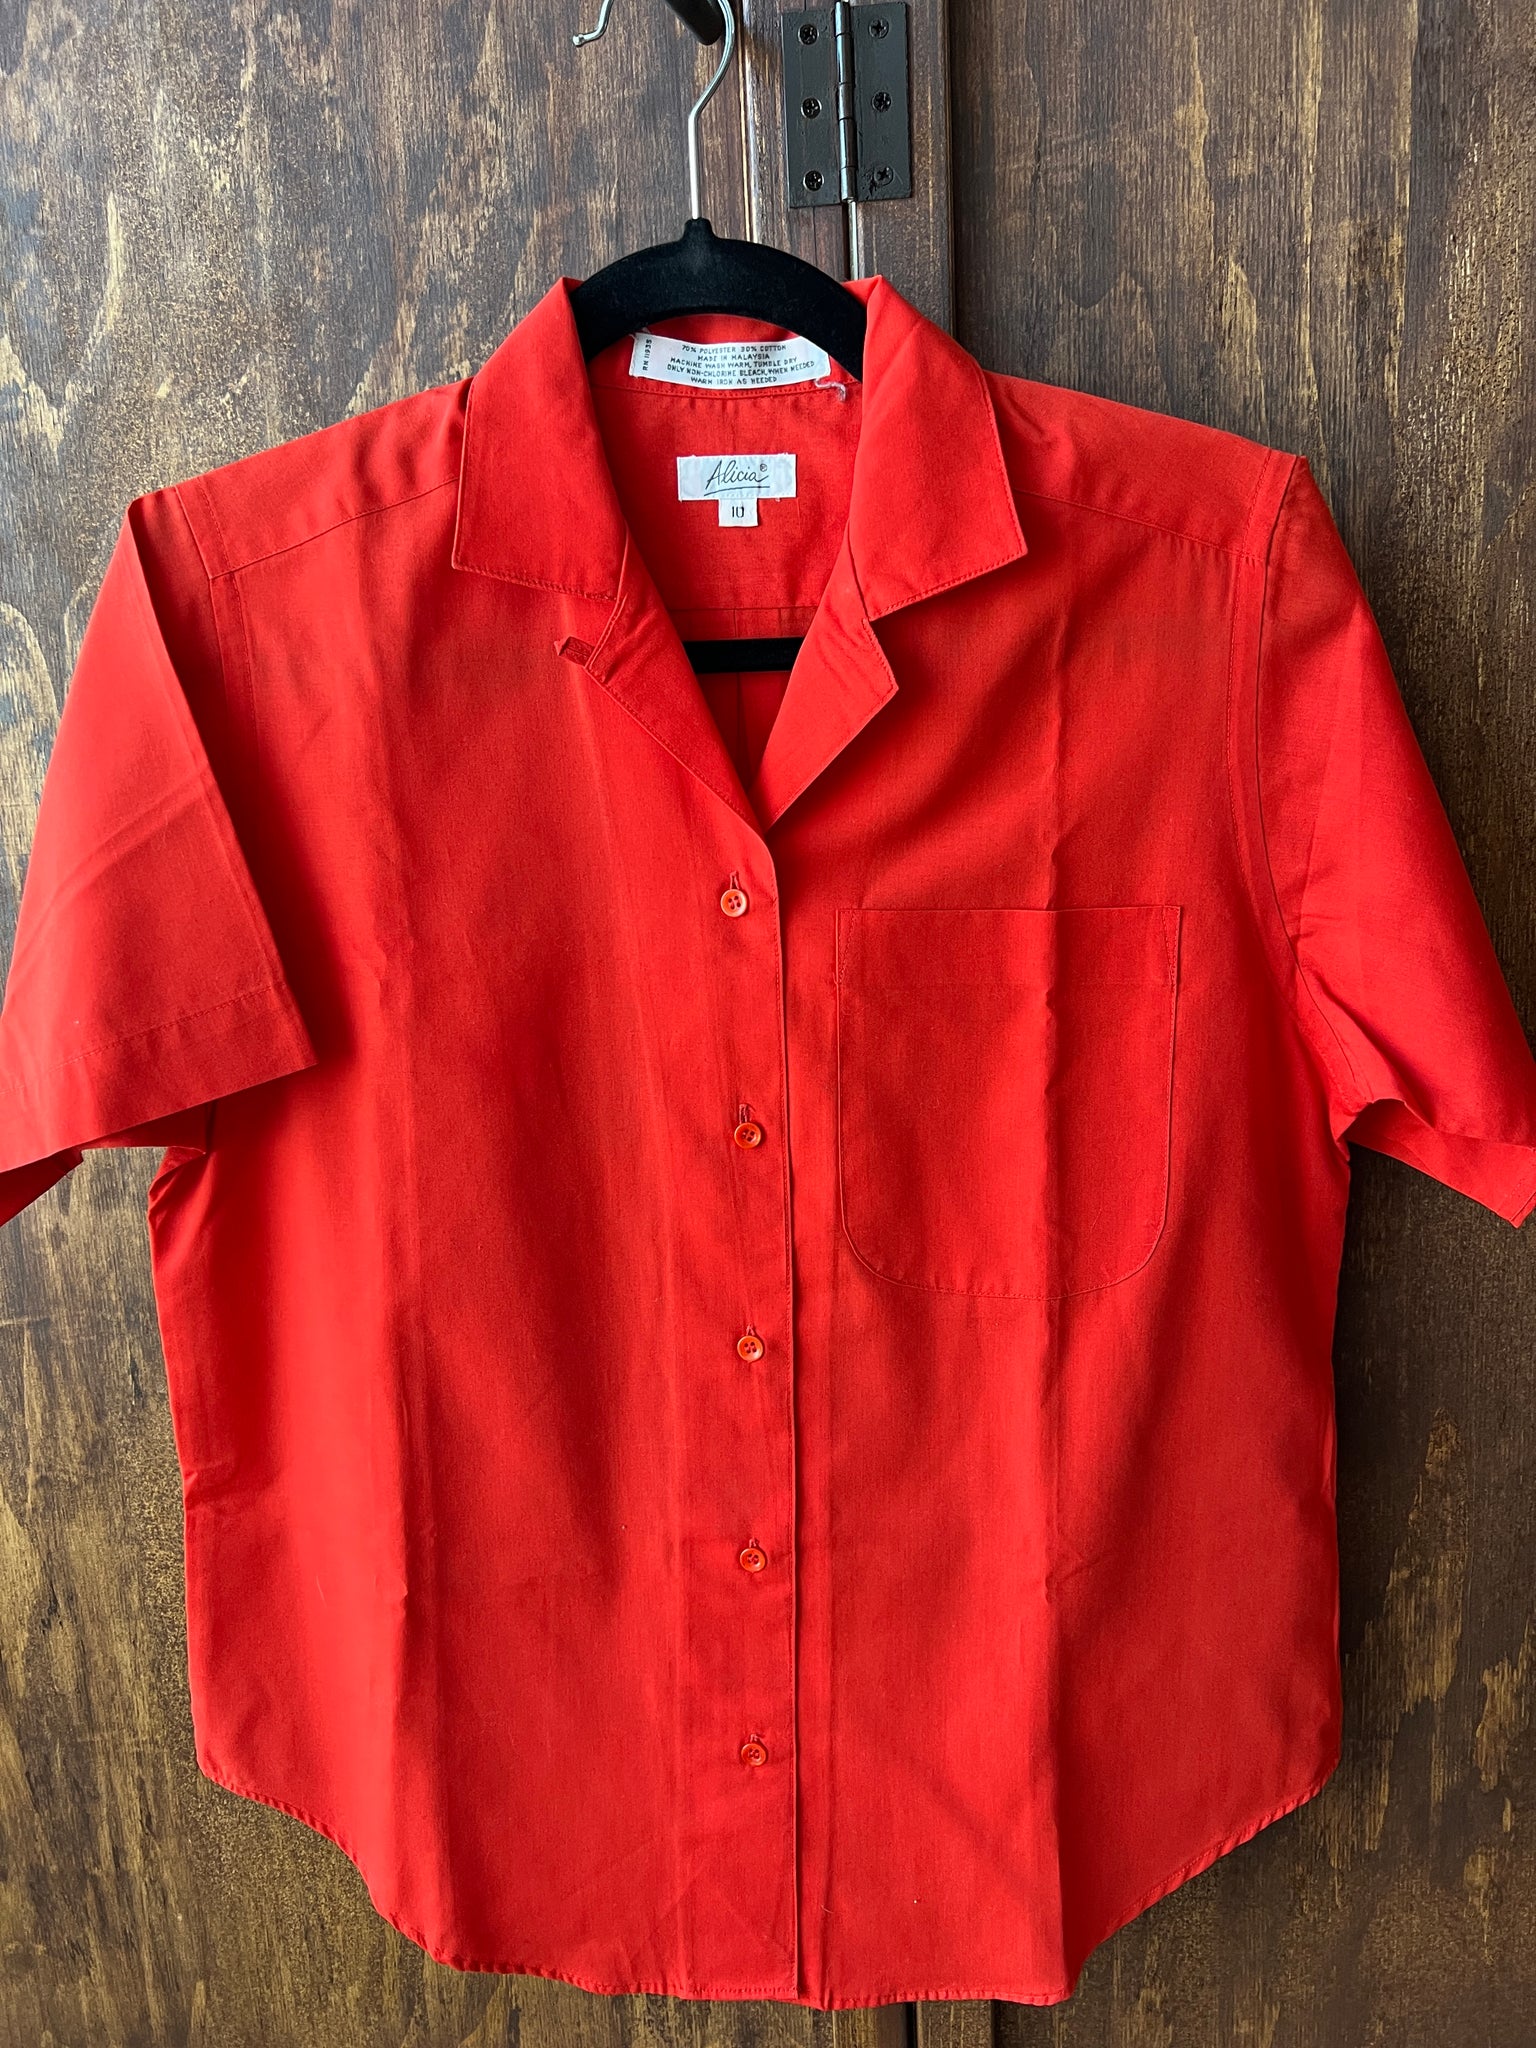 1980s TOP- Alicia red cotton/poly camp s/s